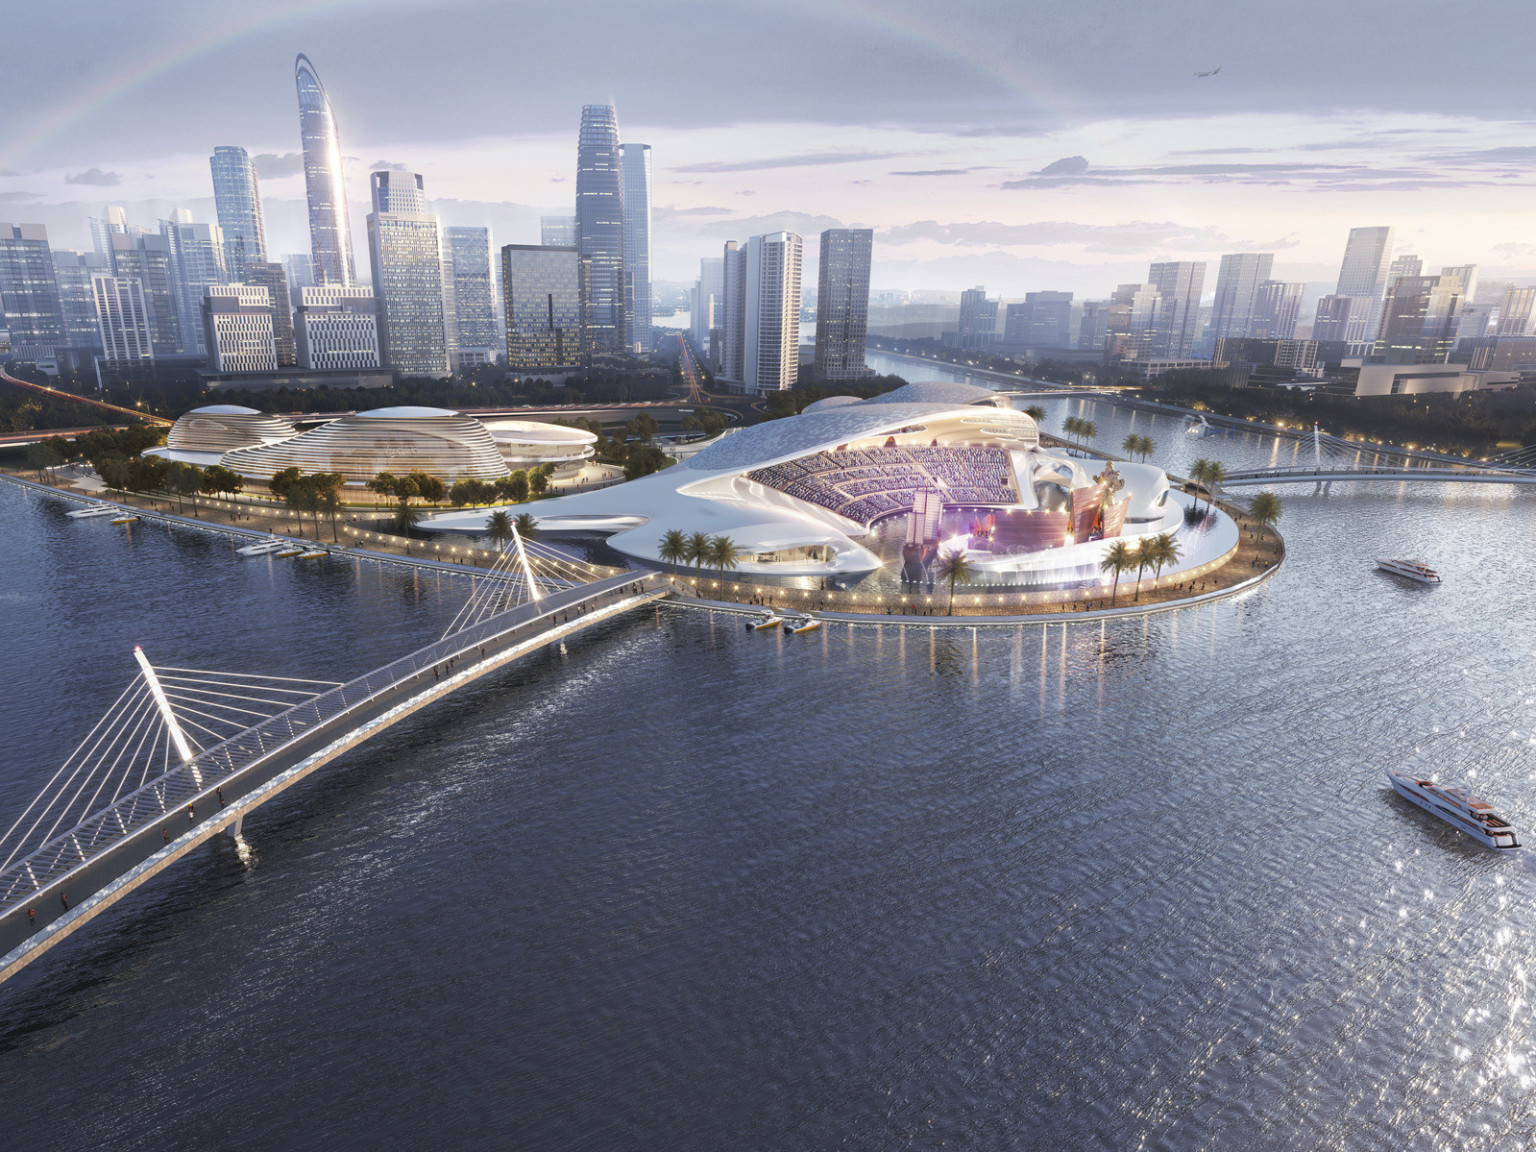 Xiamen Cultural Complex in China. Bridges connect to land with white sweeping multipurpose event center and stadium seating